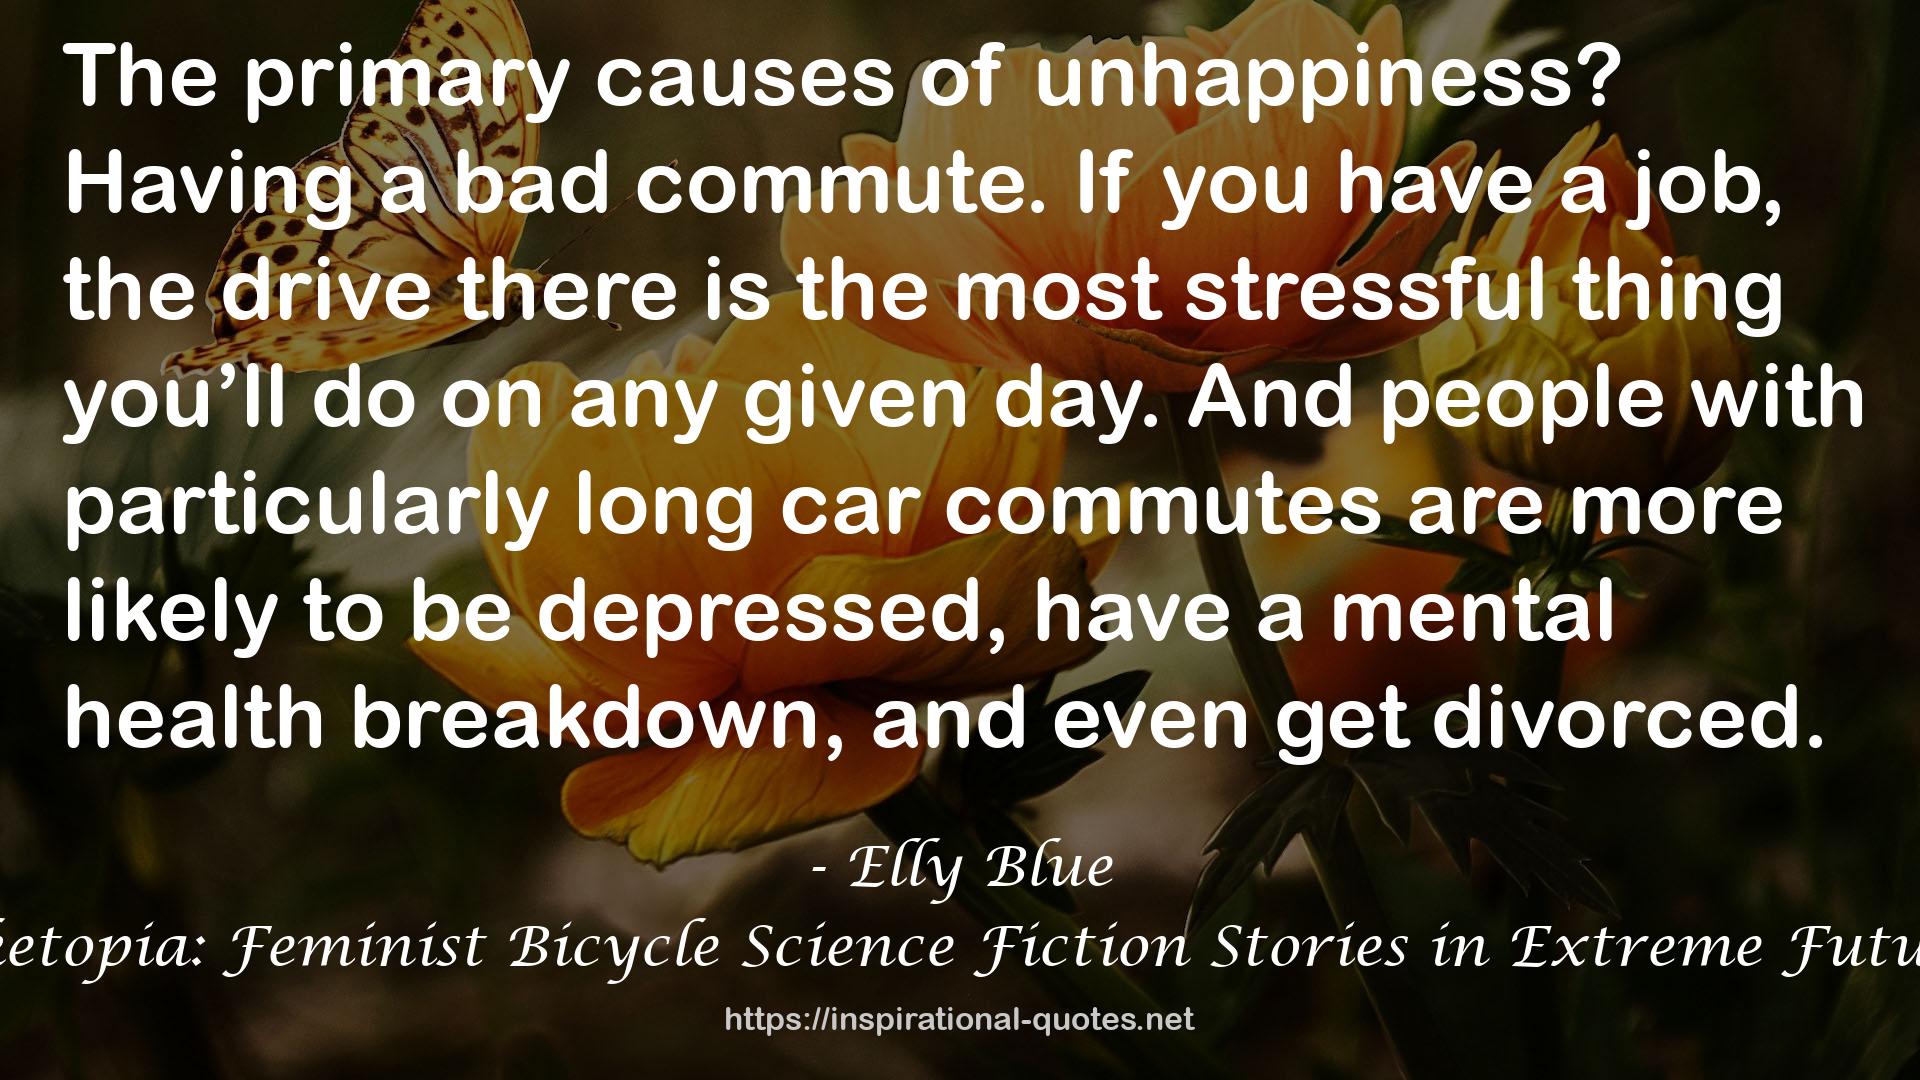 Biketopia: Feminist Bicycle Science Fiction Stories in Extreme Futures QUOTES